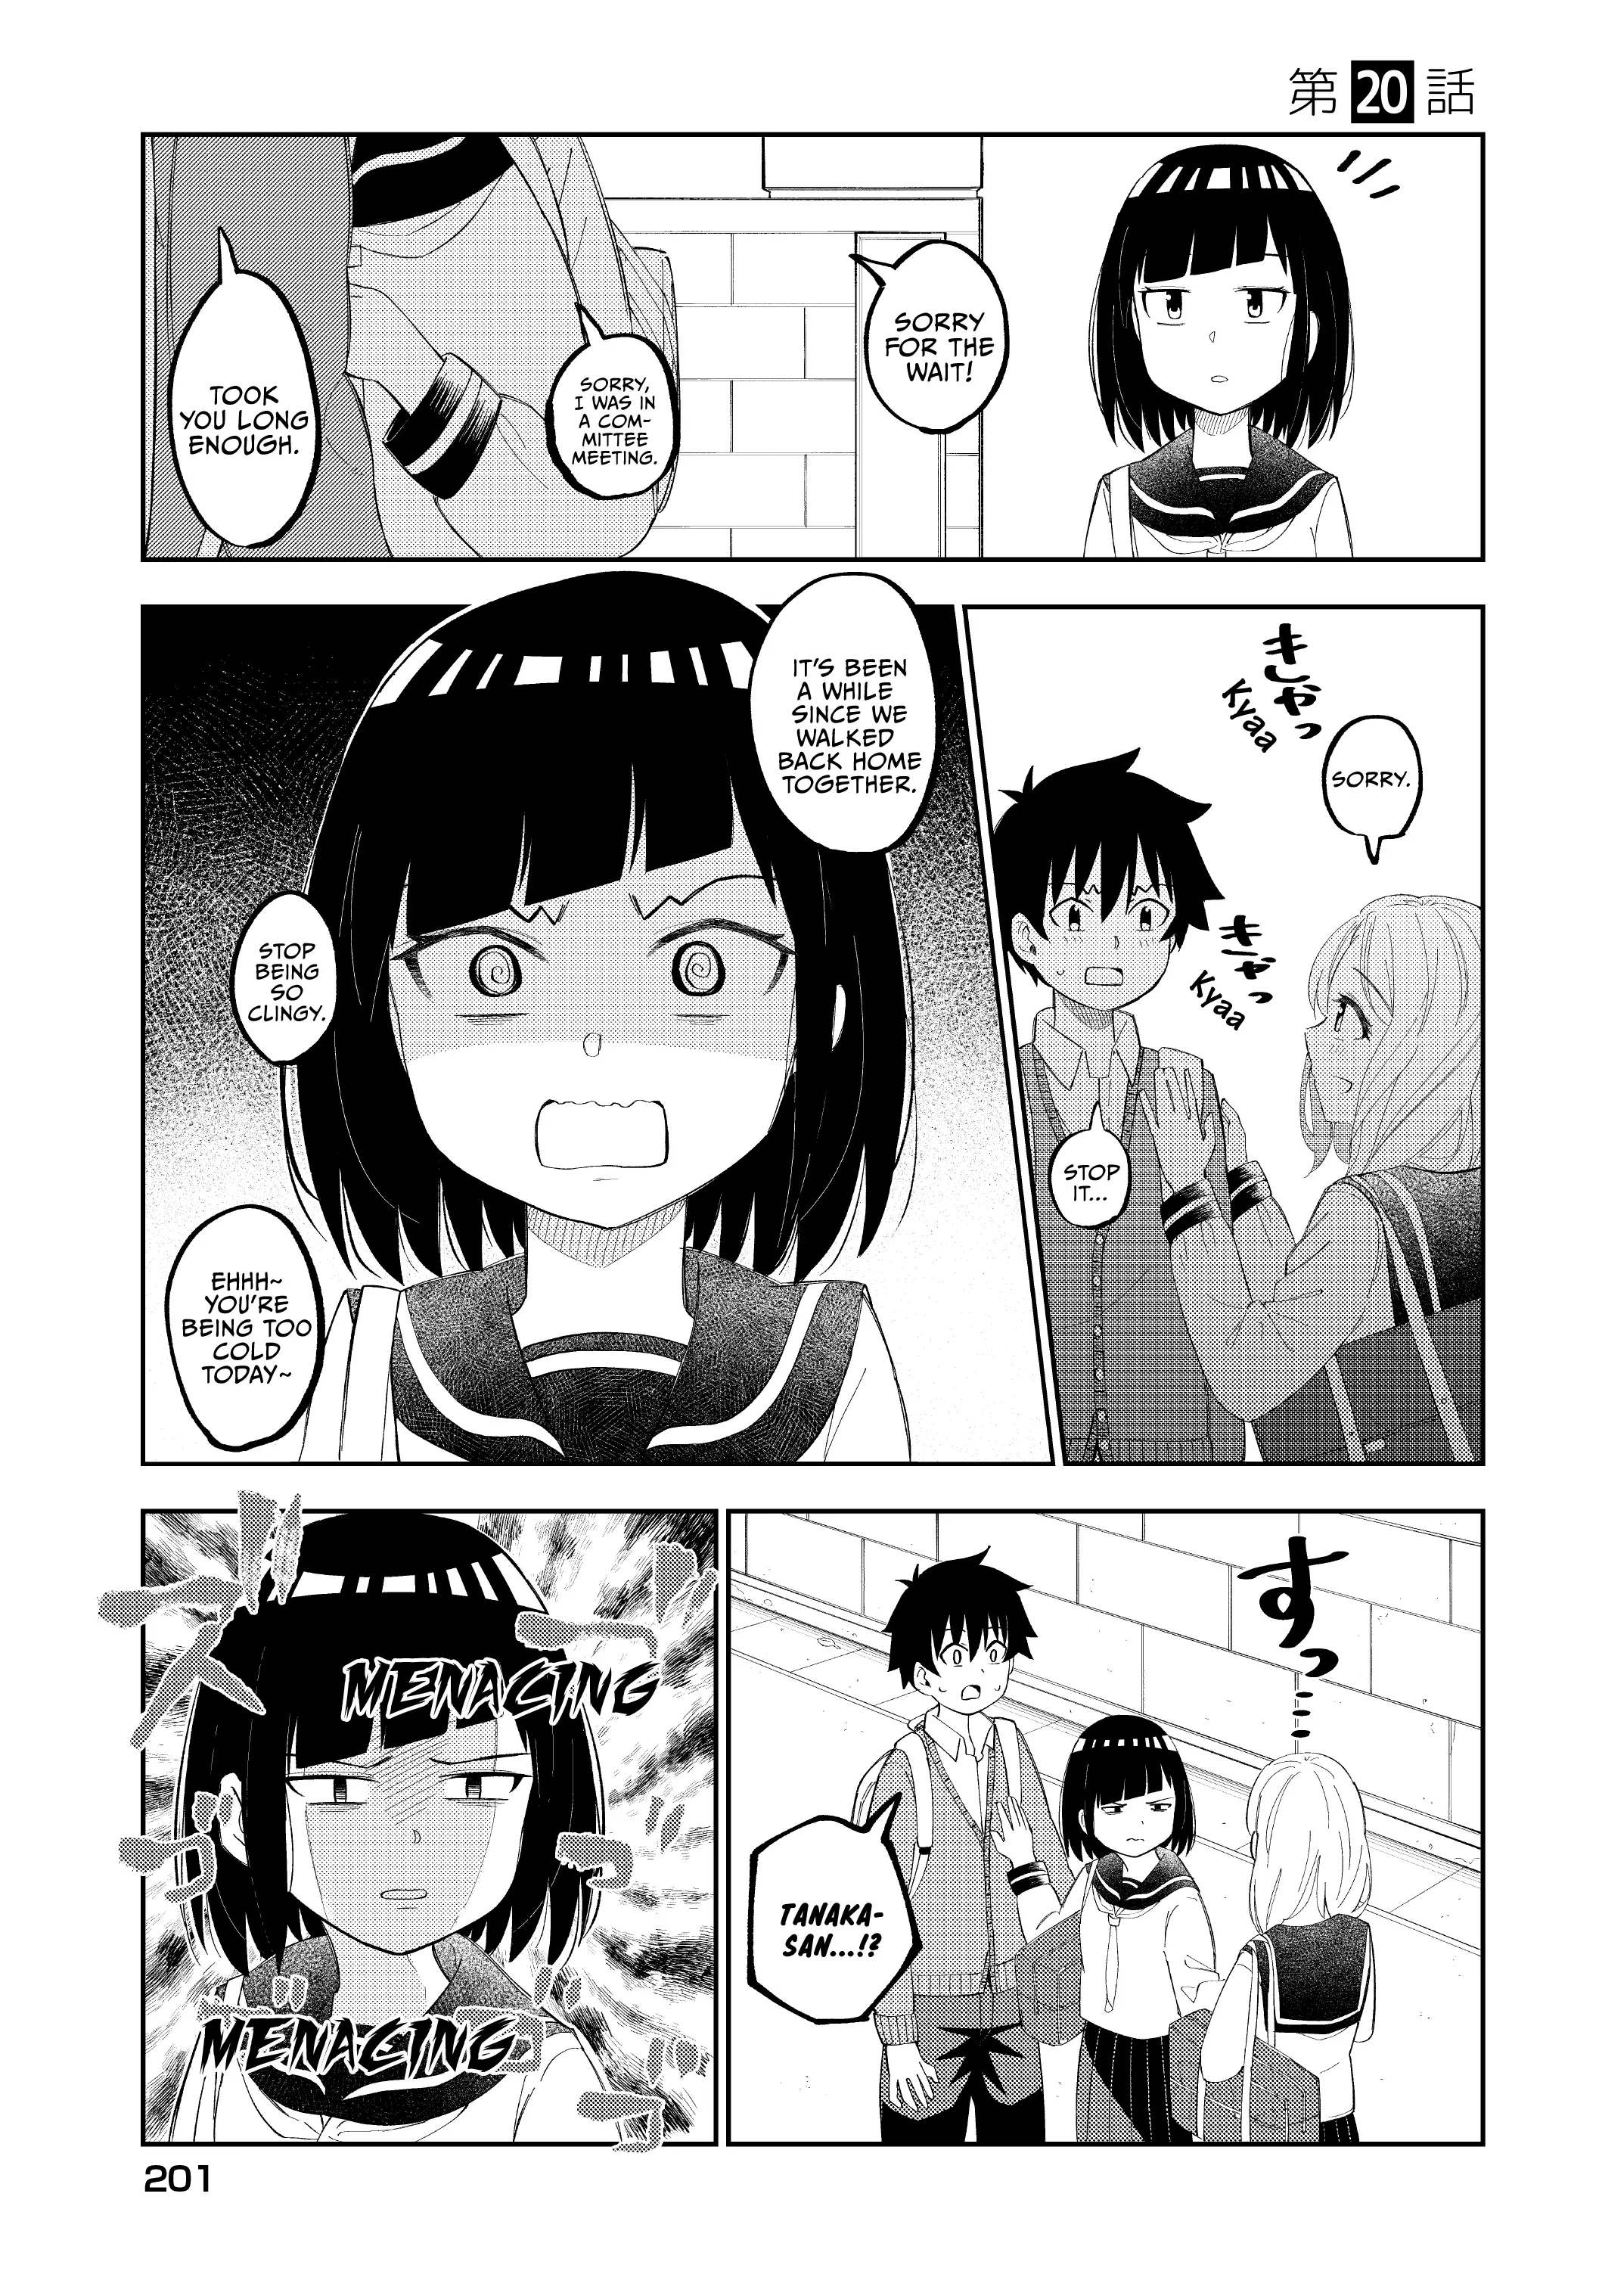 My Classmate Tanaka-San Is Super Scary - 20 page 2